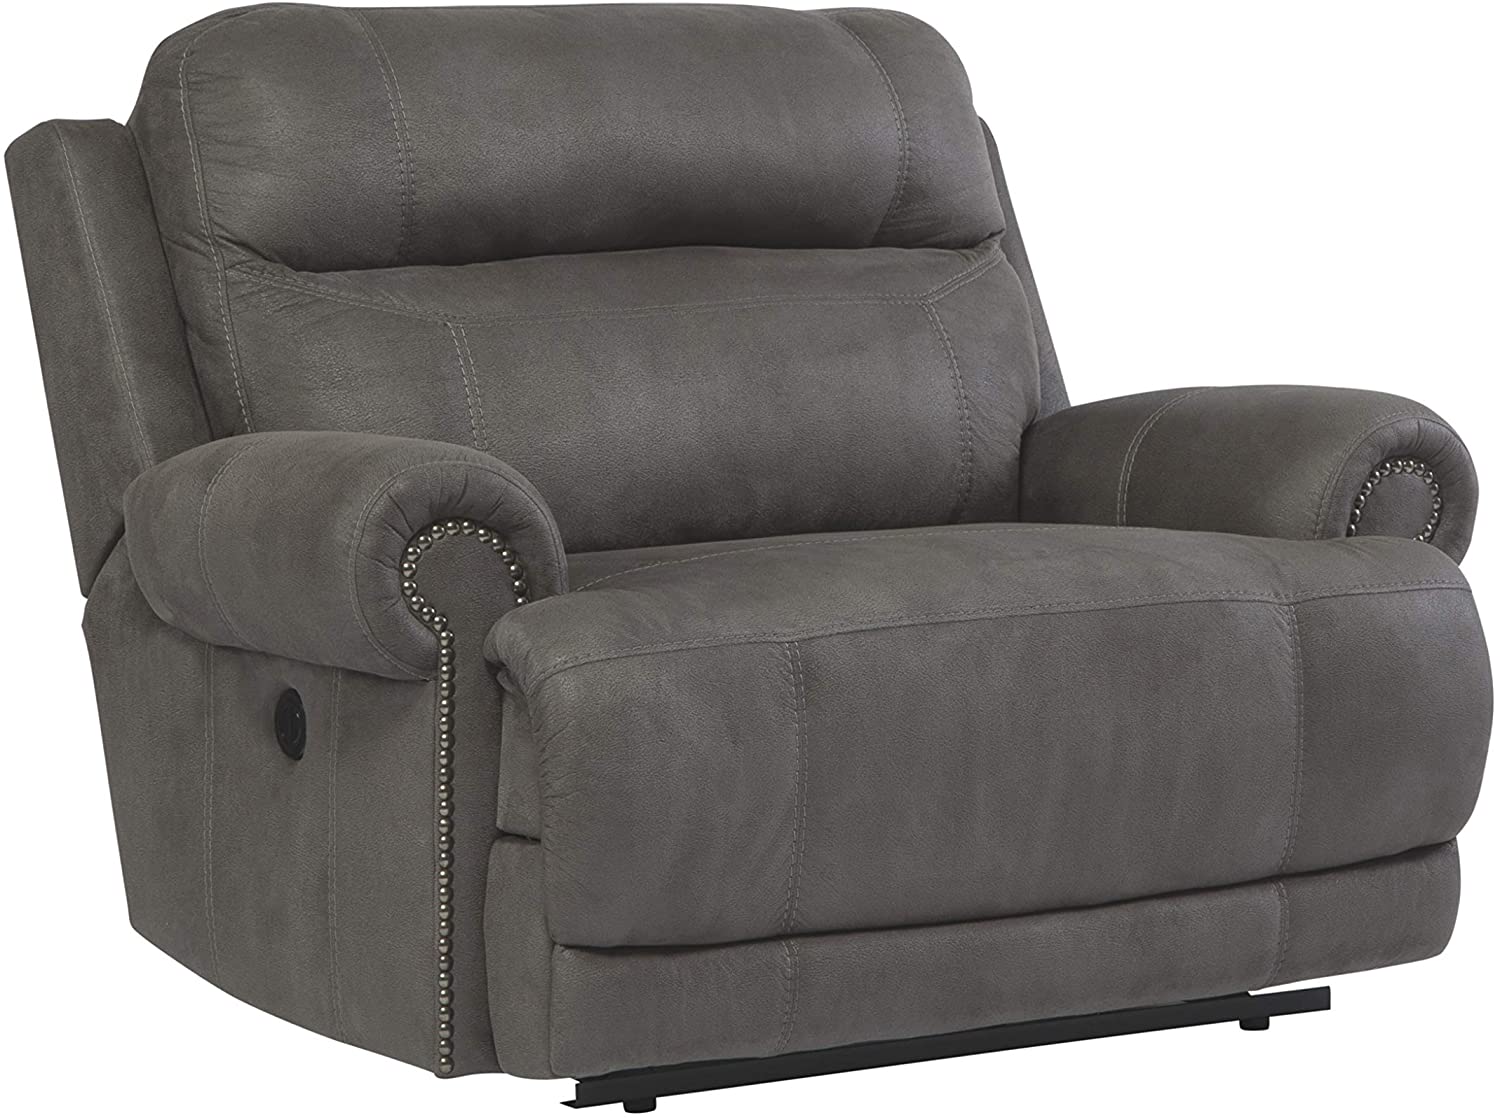 Signature Design by Ashley - Austere Contemporary Upholstered Zero Wall Recliner, Gray